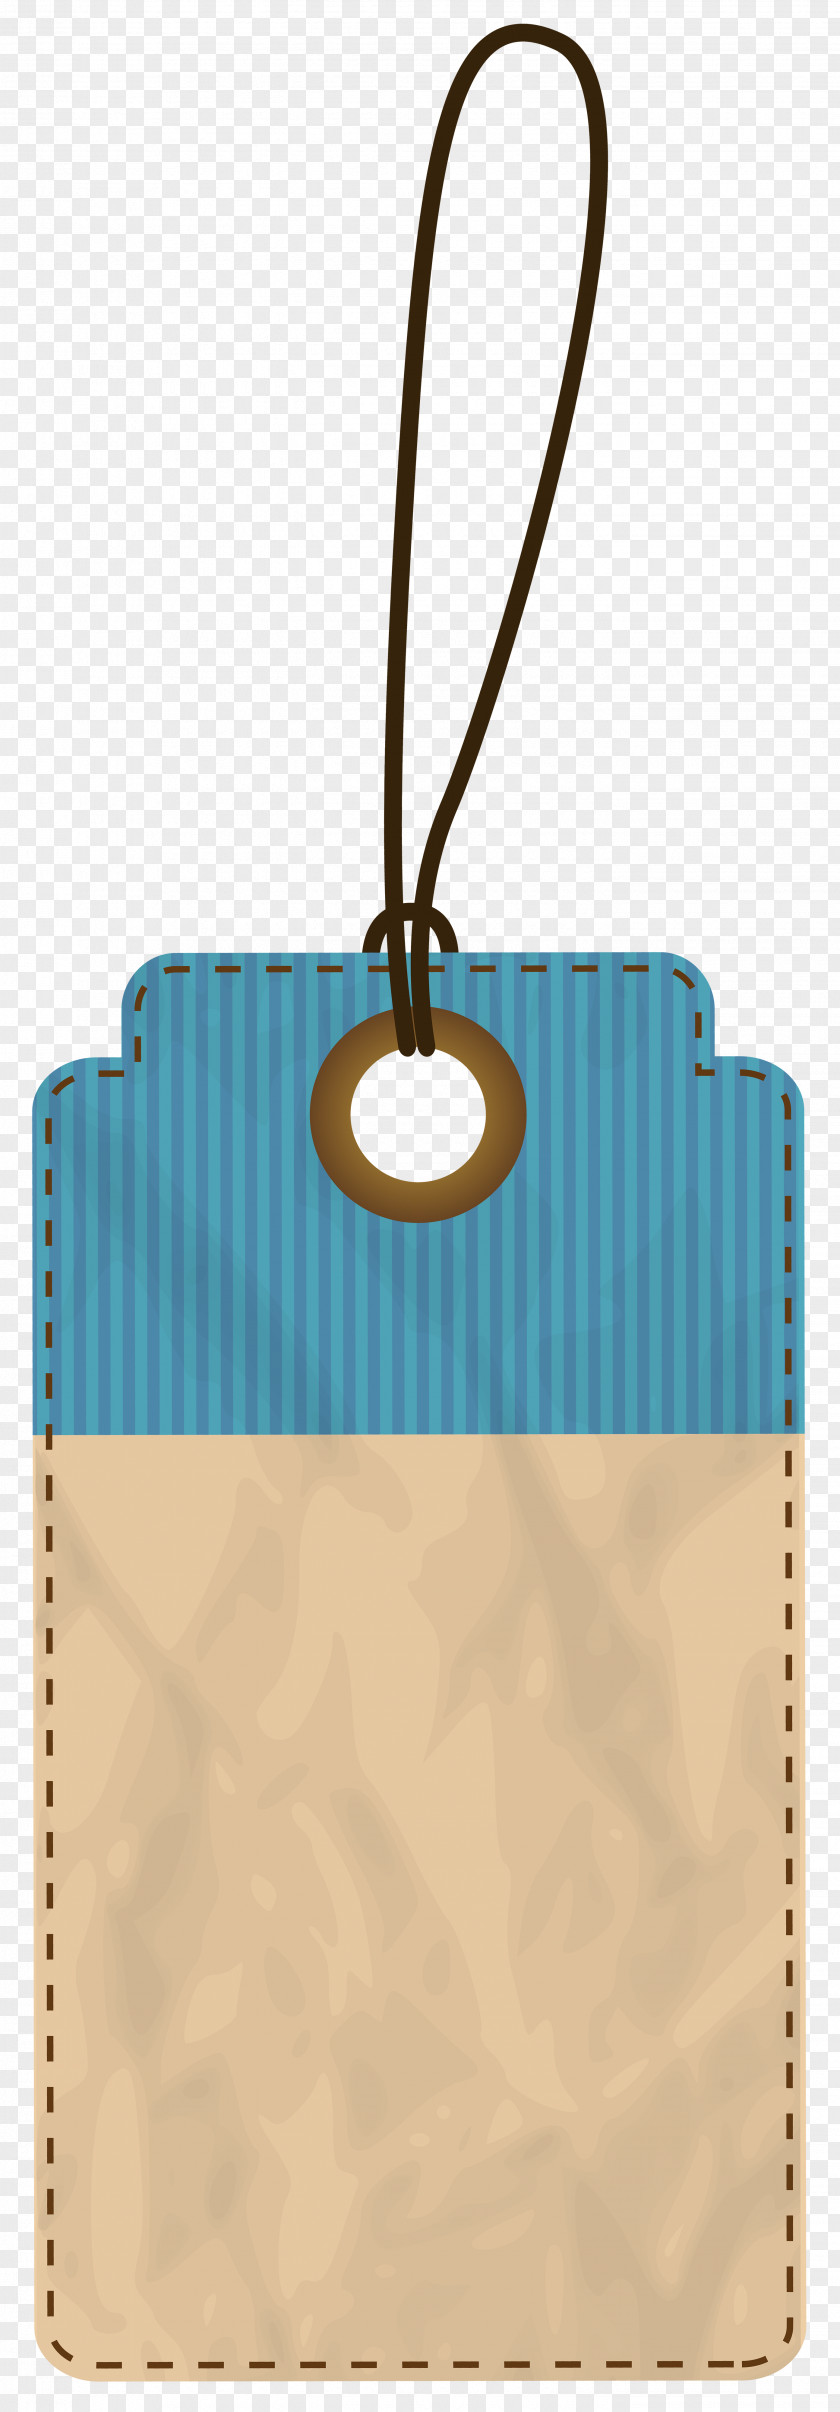 Price Tag Template Clip Art Icon PNG